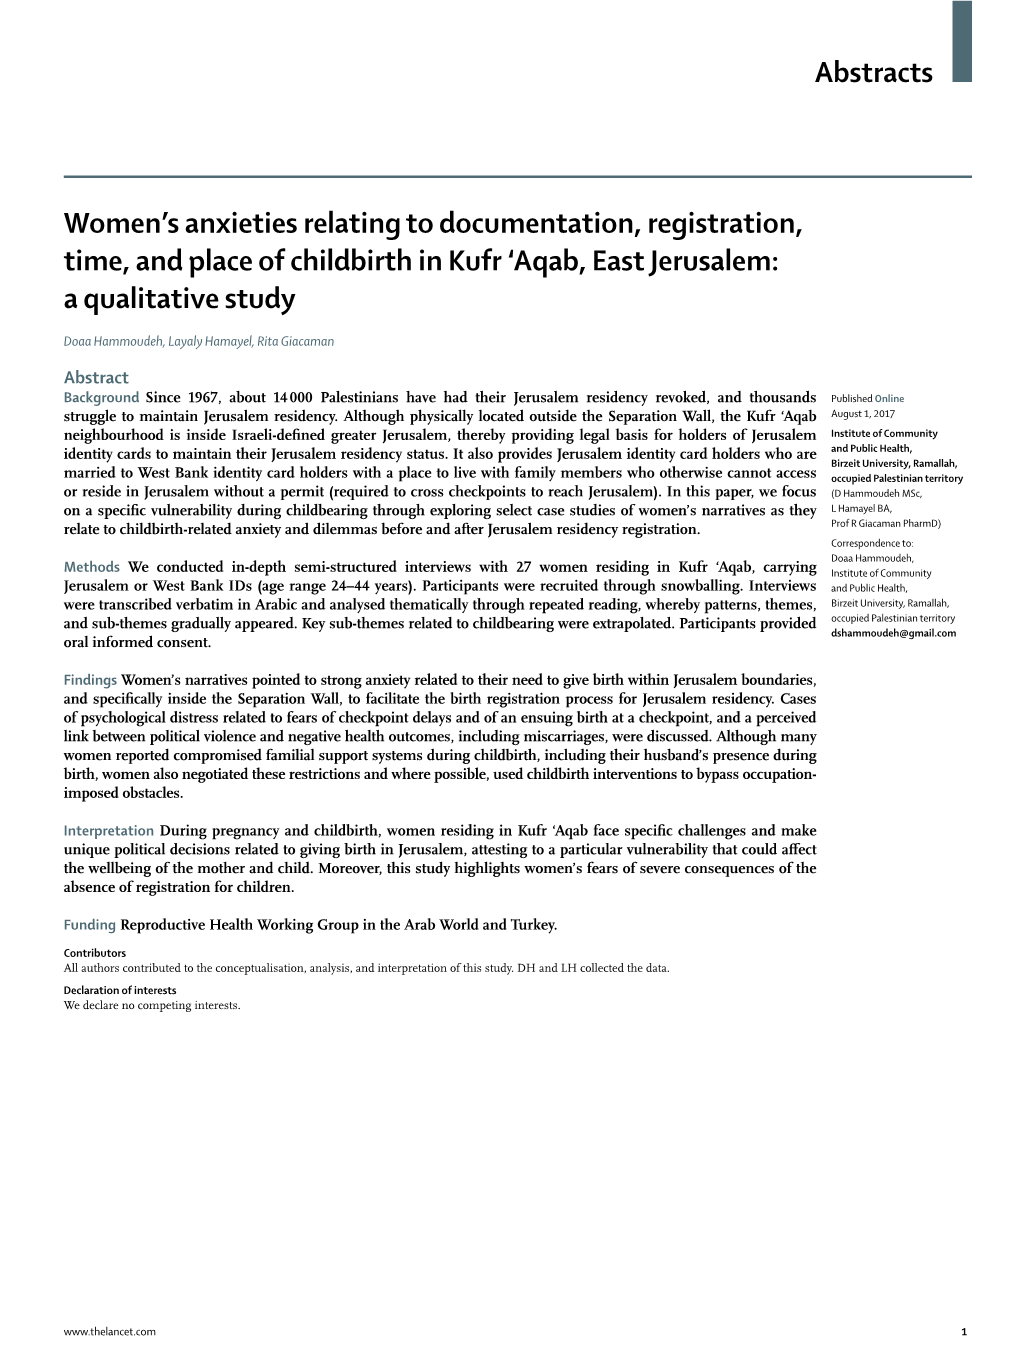 Women's Anxieties Relating to Documentation, Registration, Time